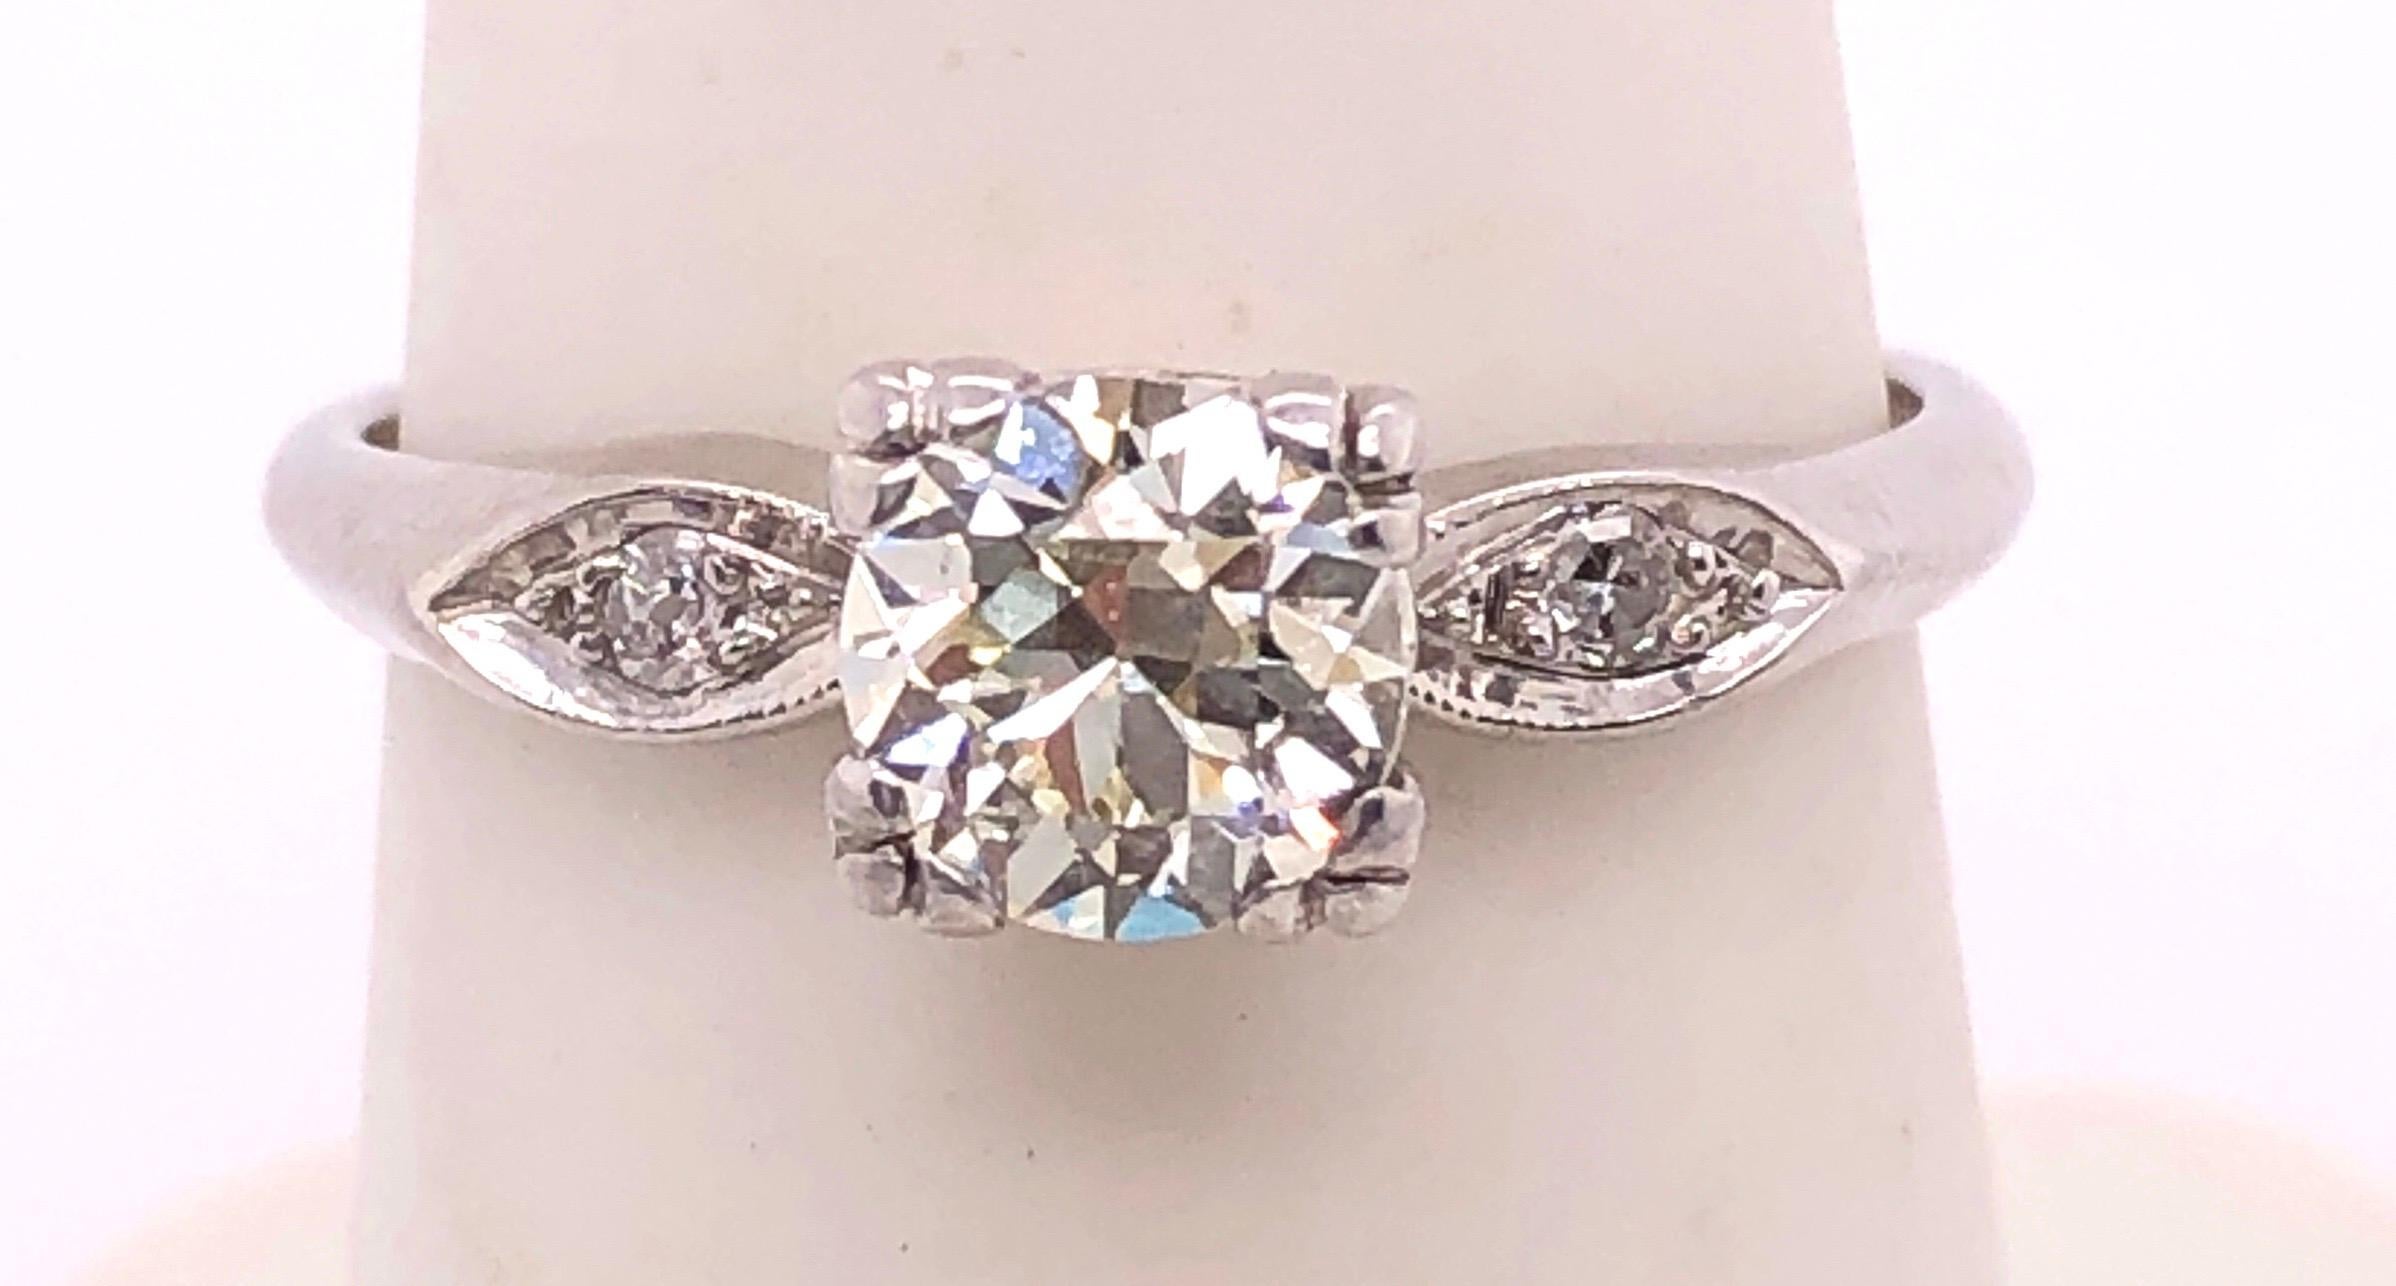 Platinum Engagement Ring 0.80 Total Diamond Weight
Size 6.5 with 2.36 grams total weight.